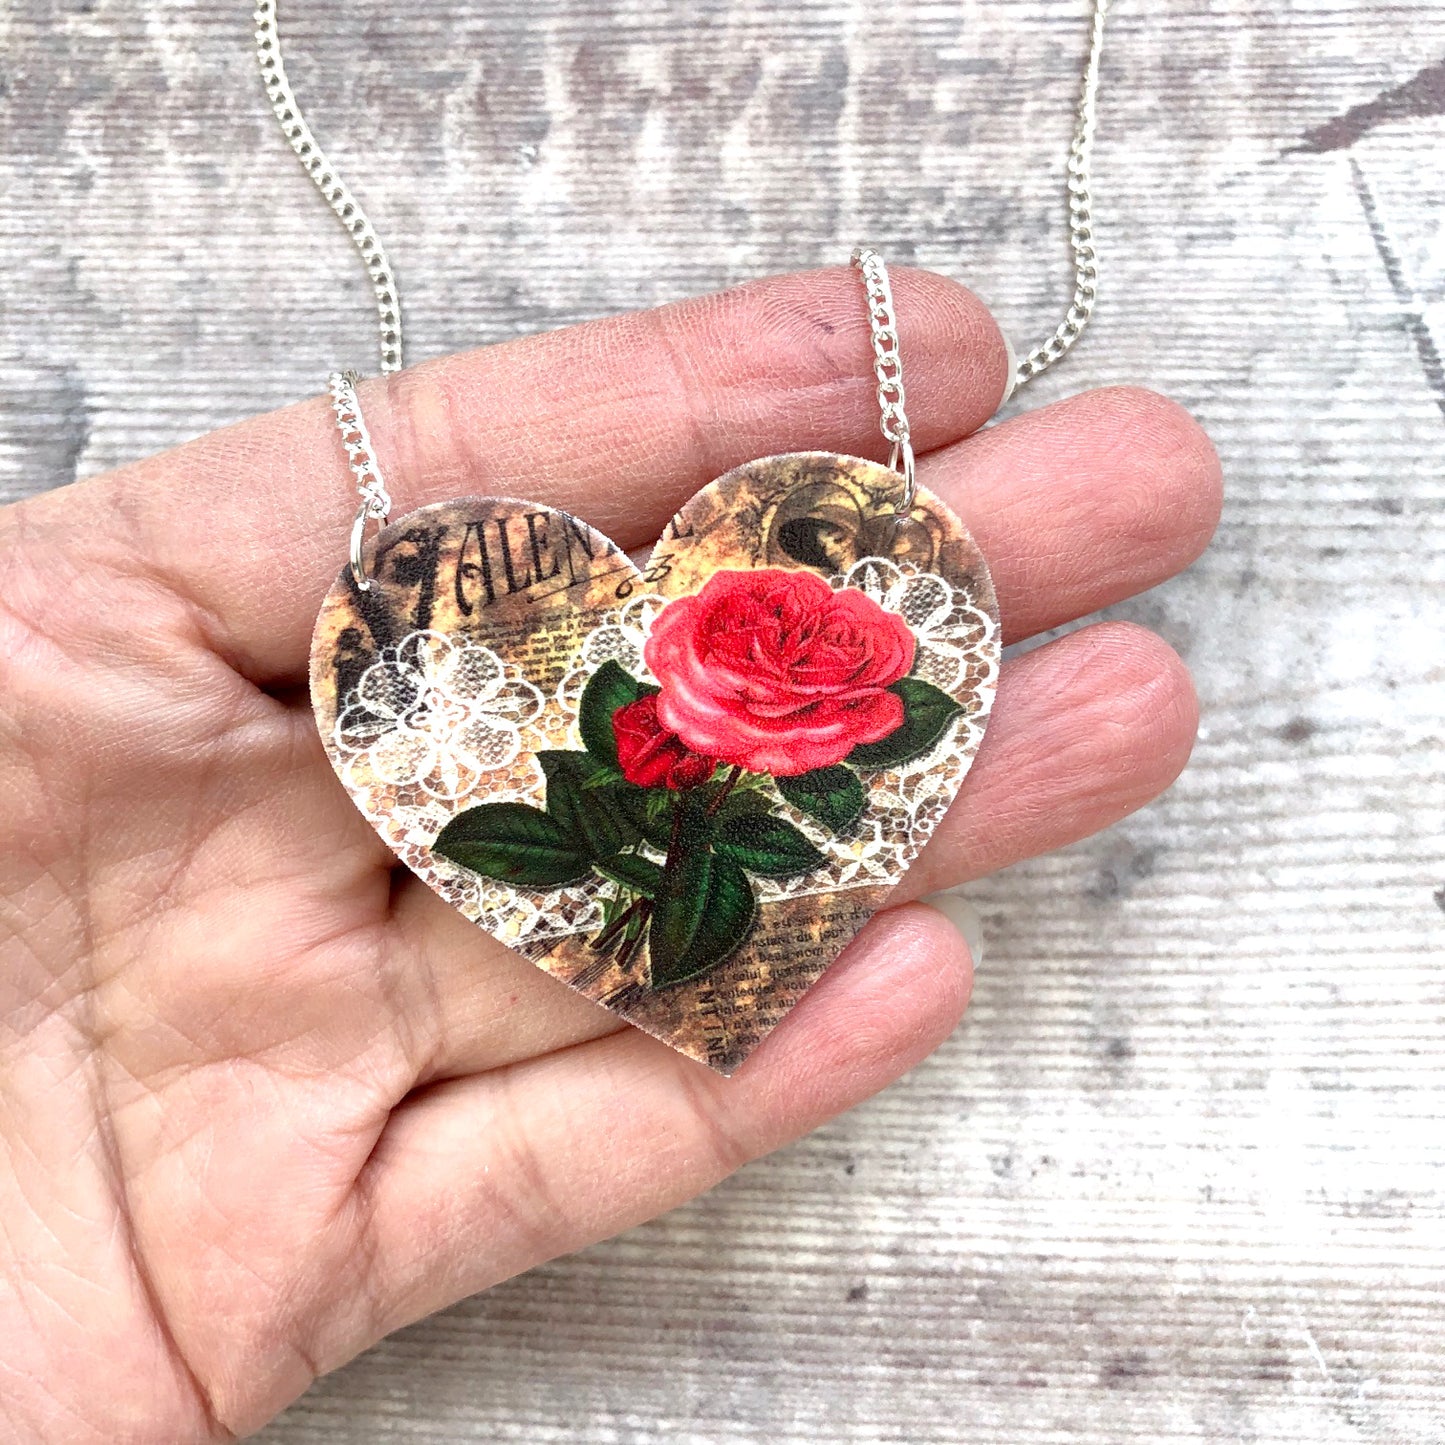 Vintage heart pendant necklace - Valentine's Day gift